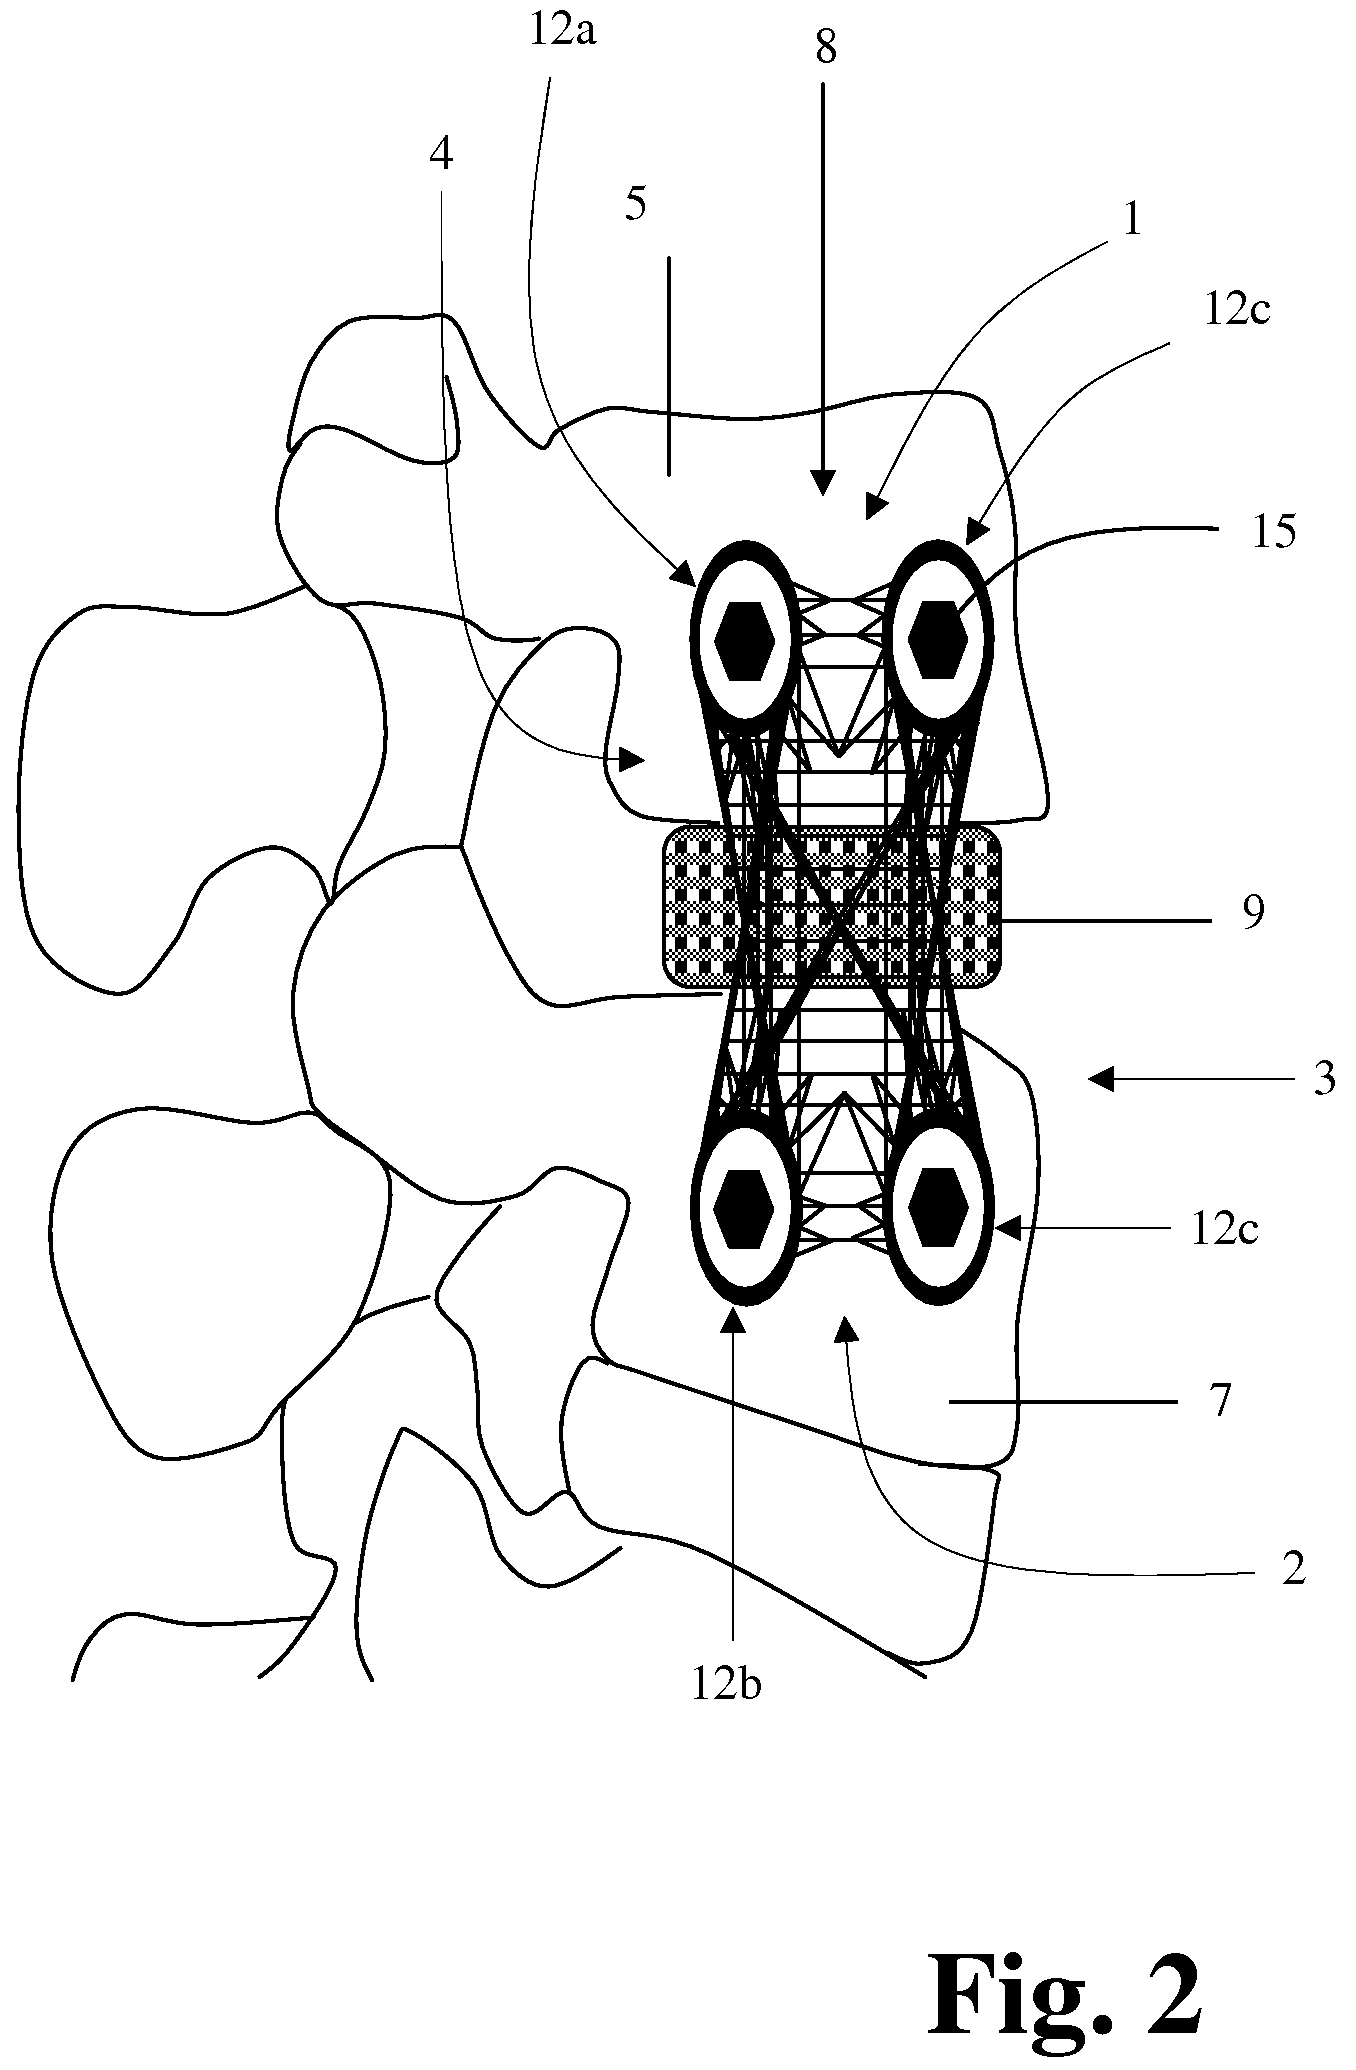 Textile-Based Plate Implant and Related Methods